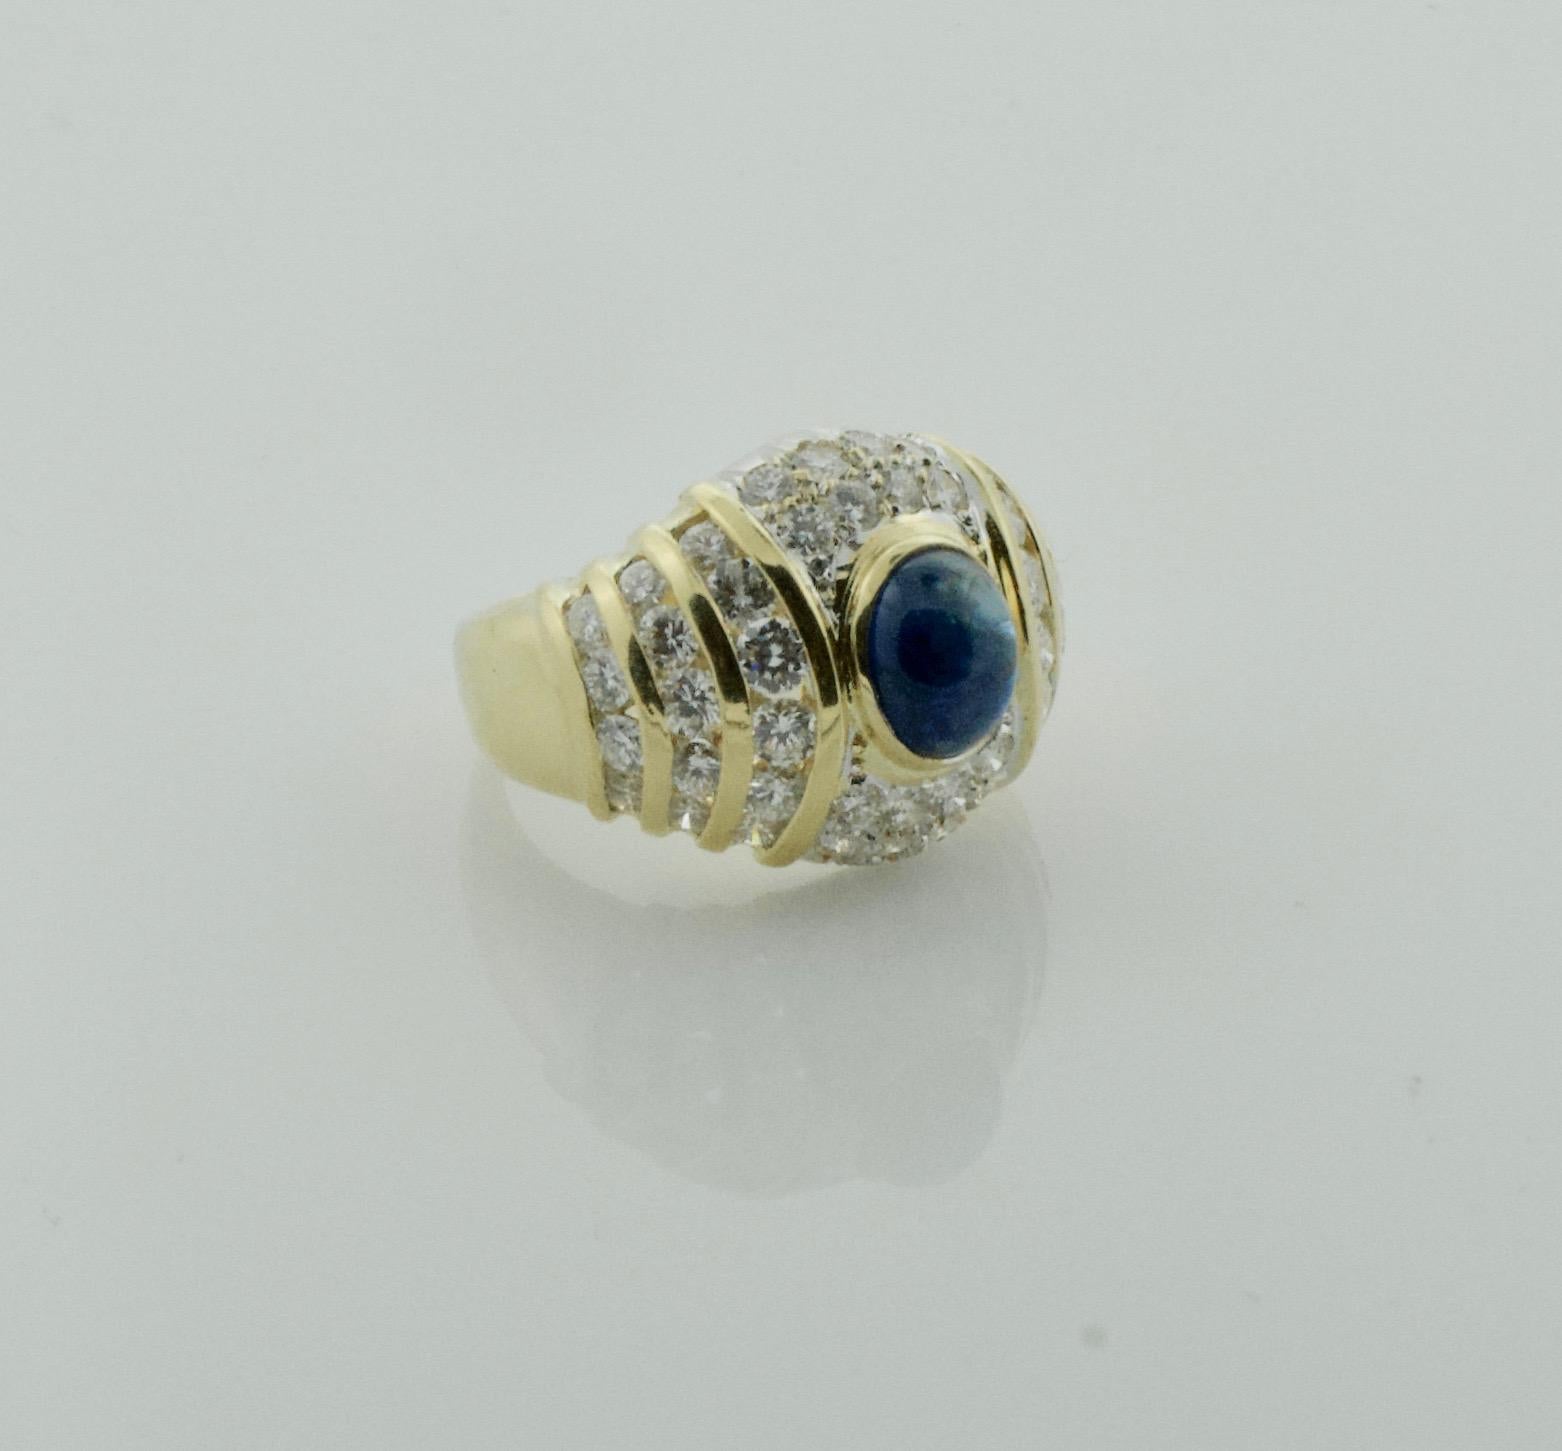 Sapphire and Diamond Fashion Ring in 18k Yellow Gold Circa 1970's
One Oval Cabochon  Sapphire Weighing 1.75 Carats Approximately [bright with no imperfections visible to the naked eye]
Forty Six Round Brilliant Cut Diamonds Weighing 1.70 Carats